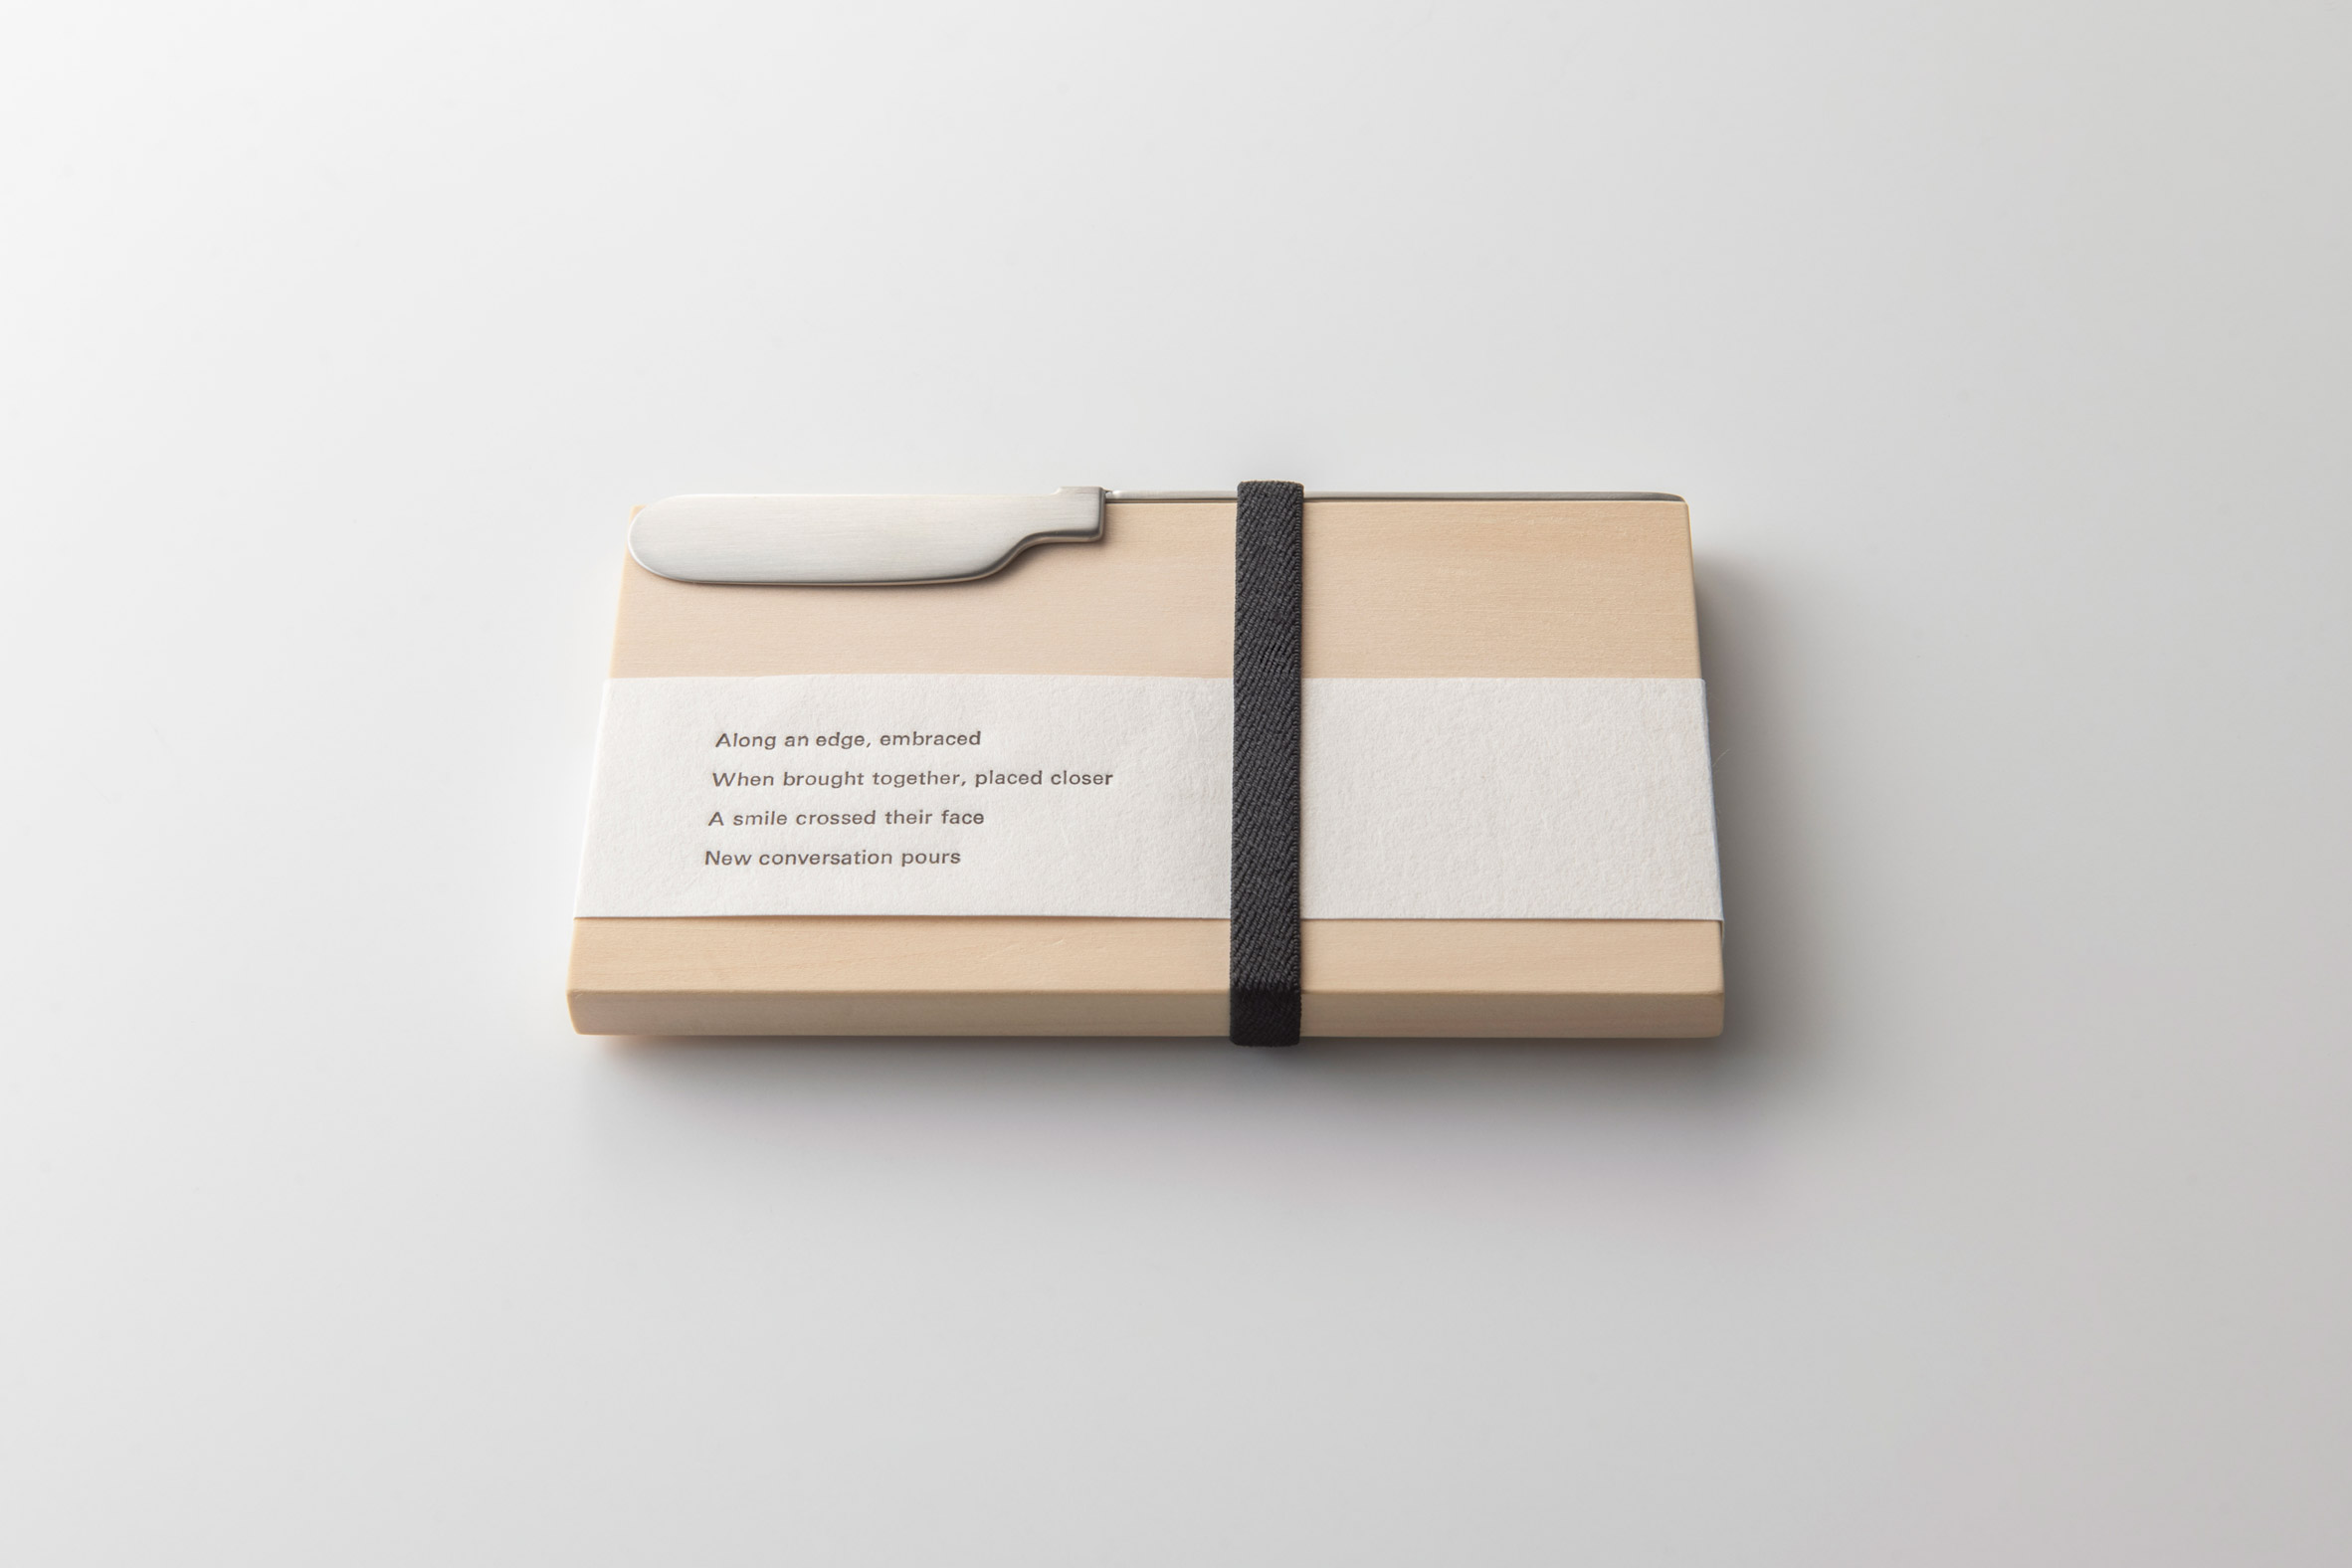 Oku knife packaged with a wood chopping board and poem printed on paper wrap